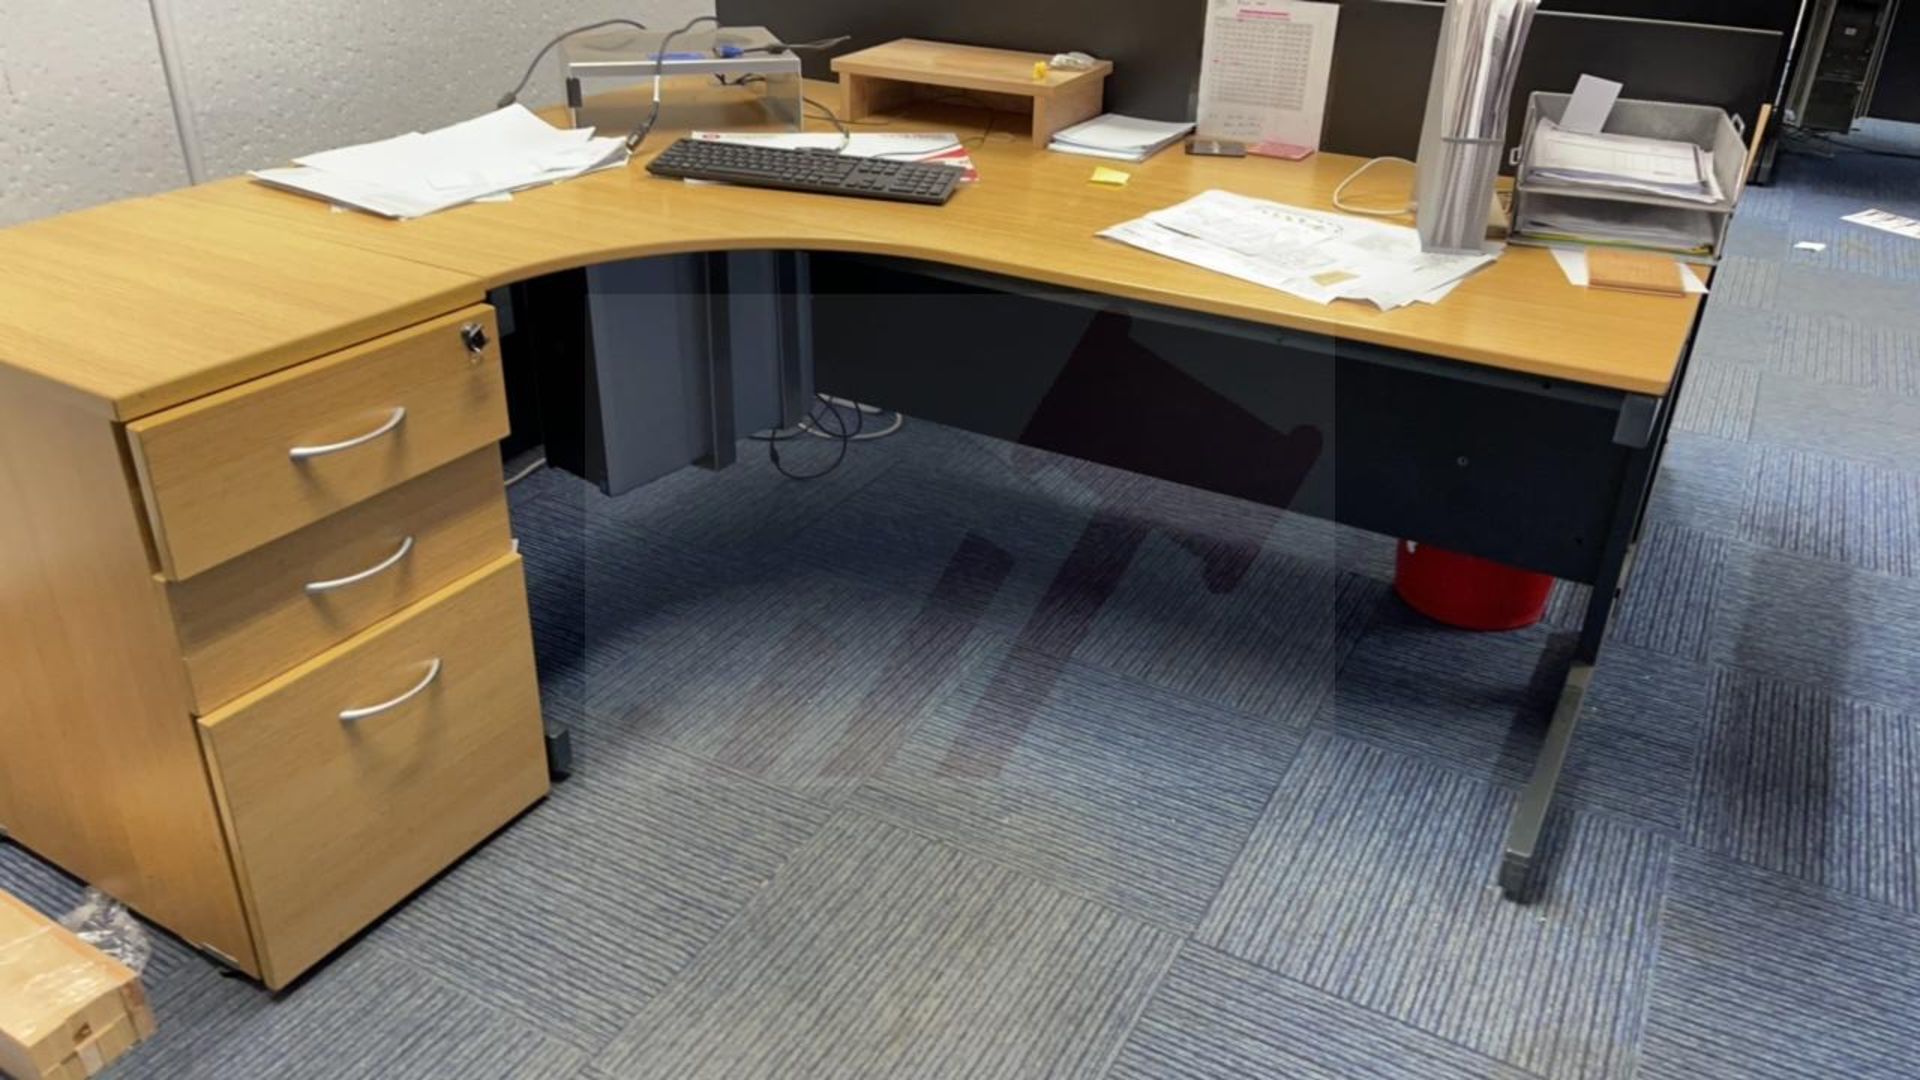 4 x Curved Wooden Effect Workdesks w/ 4 x 3 Drawer Pedestal Units, 2 x Dividing Panels & PC Tower Ho - Image 5 of 5